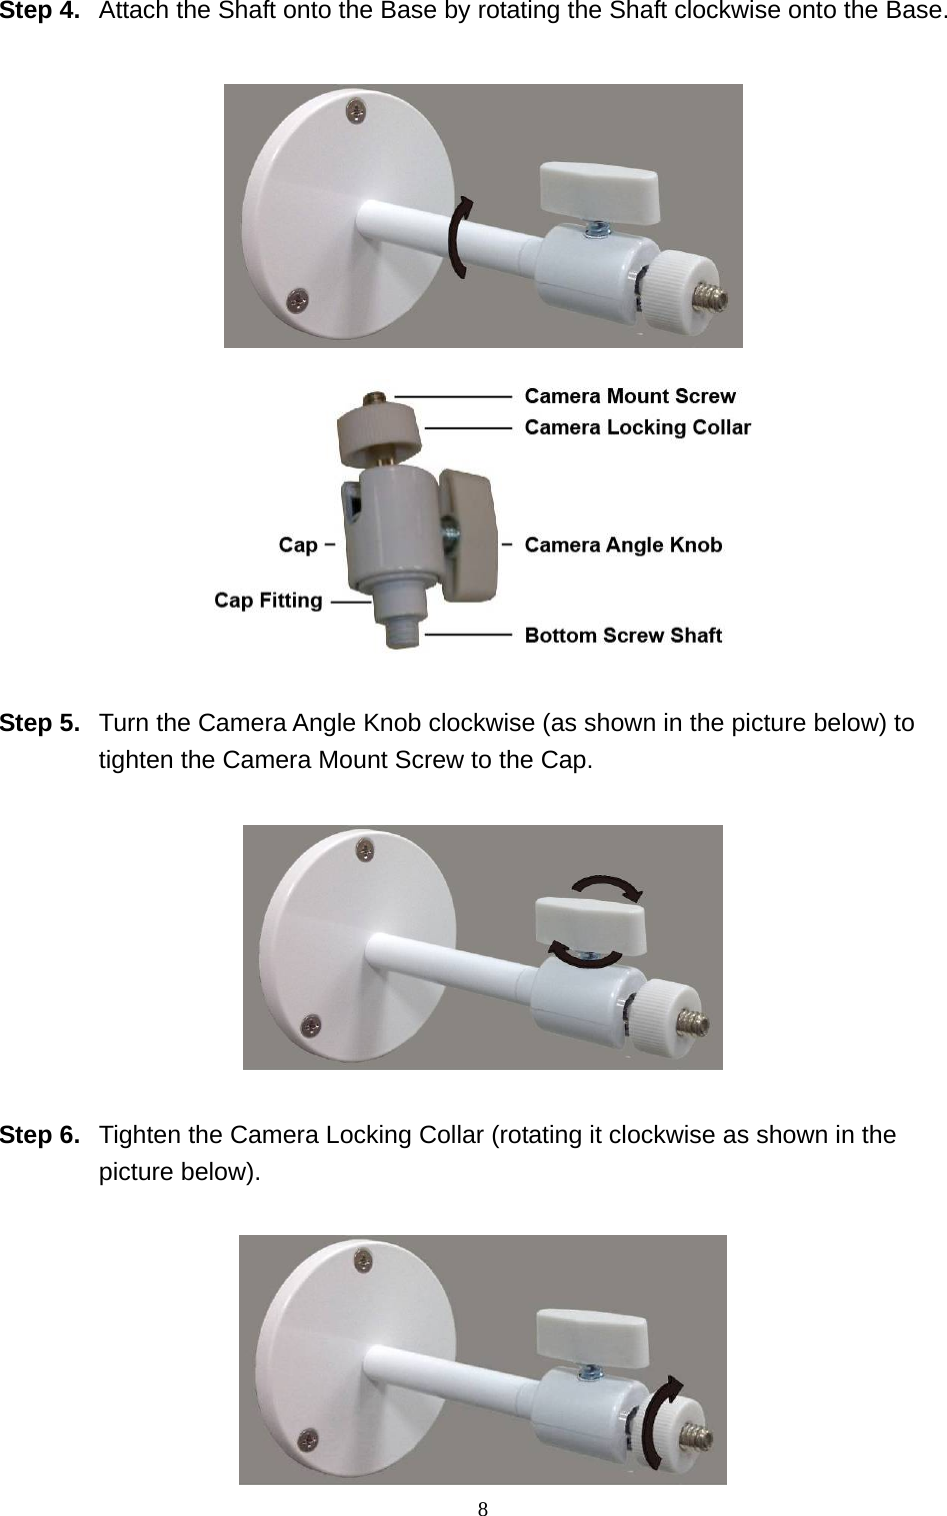 8  Step 4.  Attach the Shaft onto the Base by rotating the Shaft clockwise onto the Base.     Step 5.  Turn the Camera Angle Knob clockwise (as shown in the picture below) to tighten the Camera Mount Screw to the Cap.    Step 6.  Tighten the Camera Locking Collar (rotating it clockwise as shown in the picture below).   